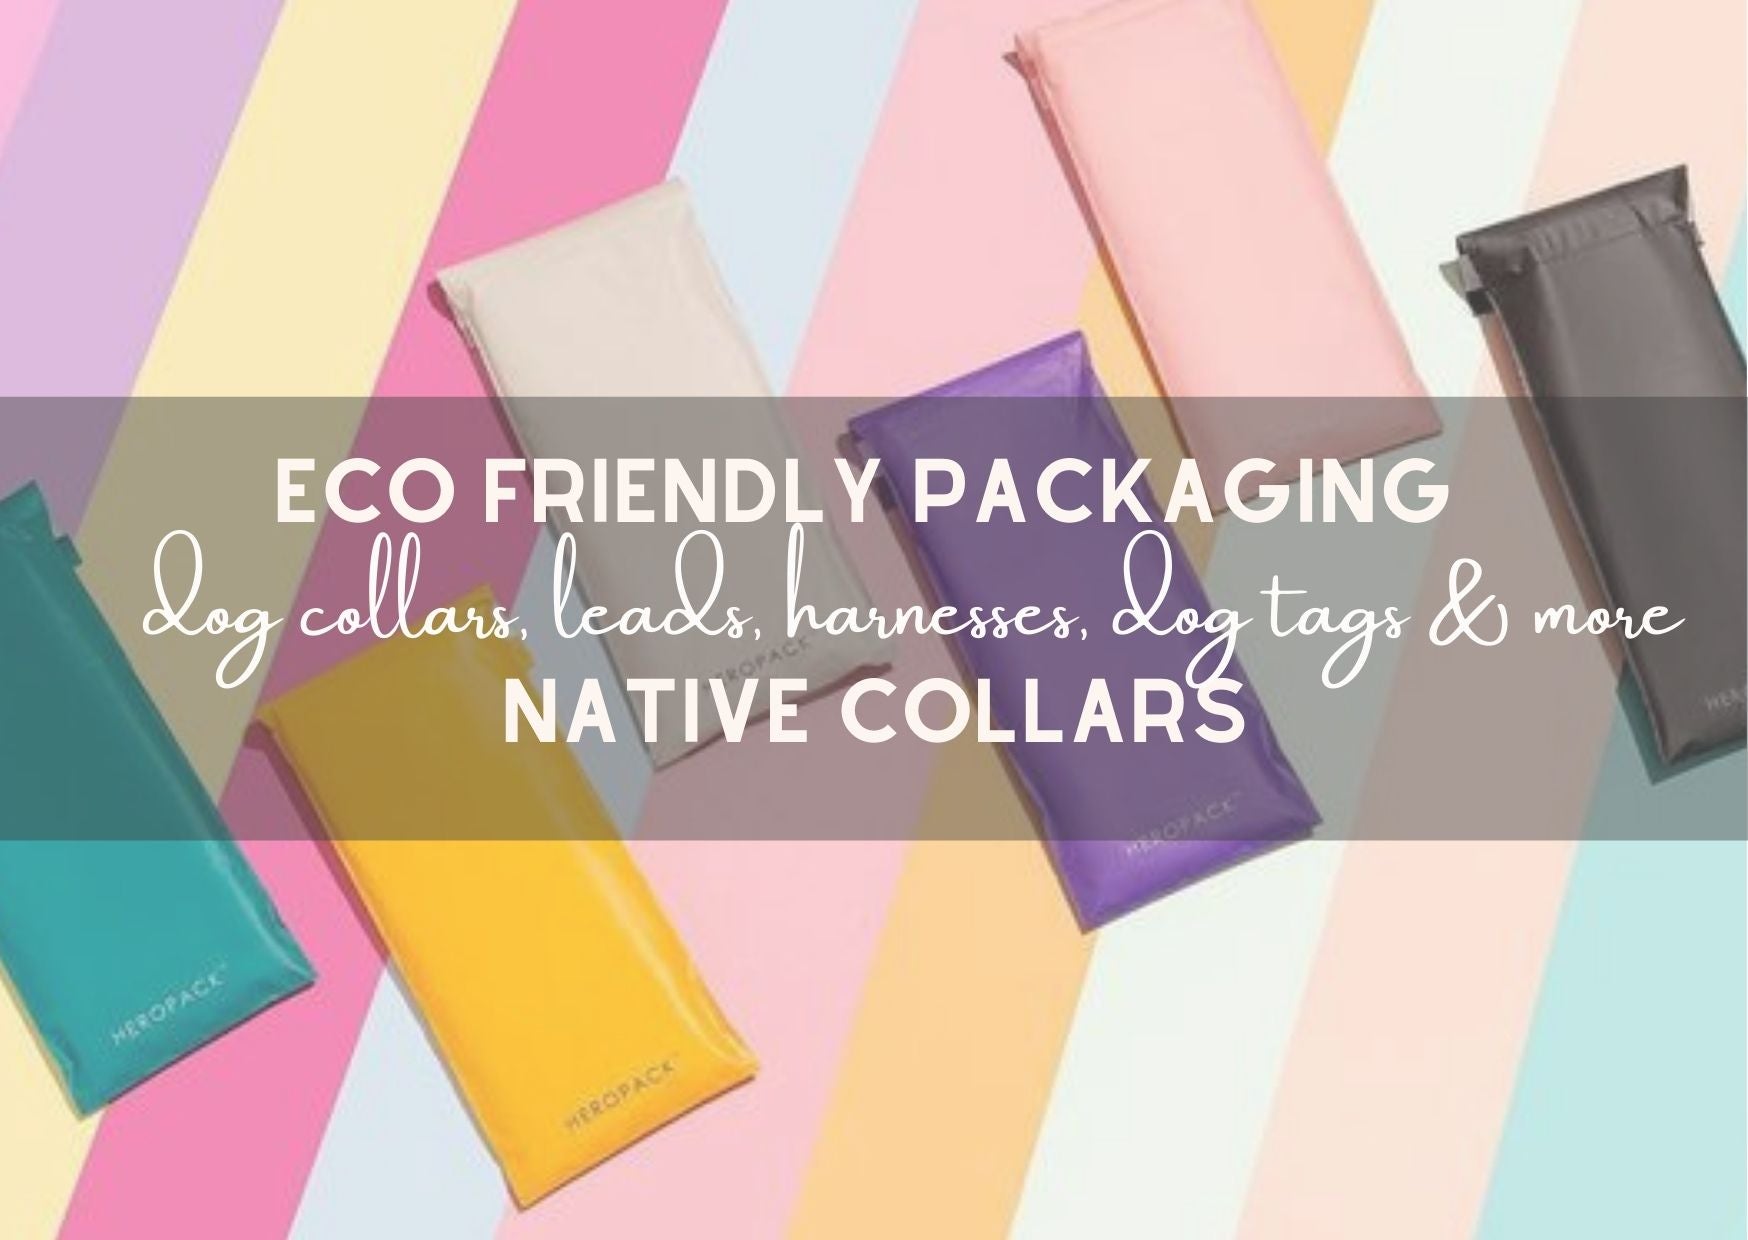 Eco Friendly Packaging for all our Dog Collars, Leads, Harnesses, Dog Tags & more - Native Collars